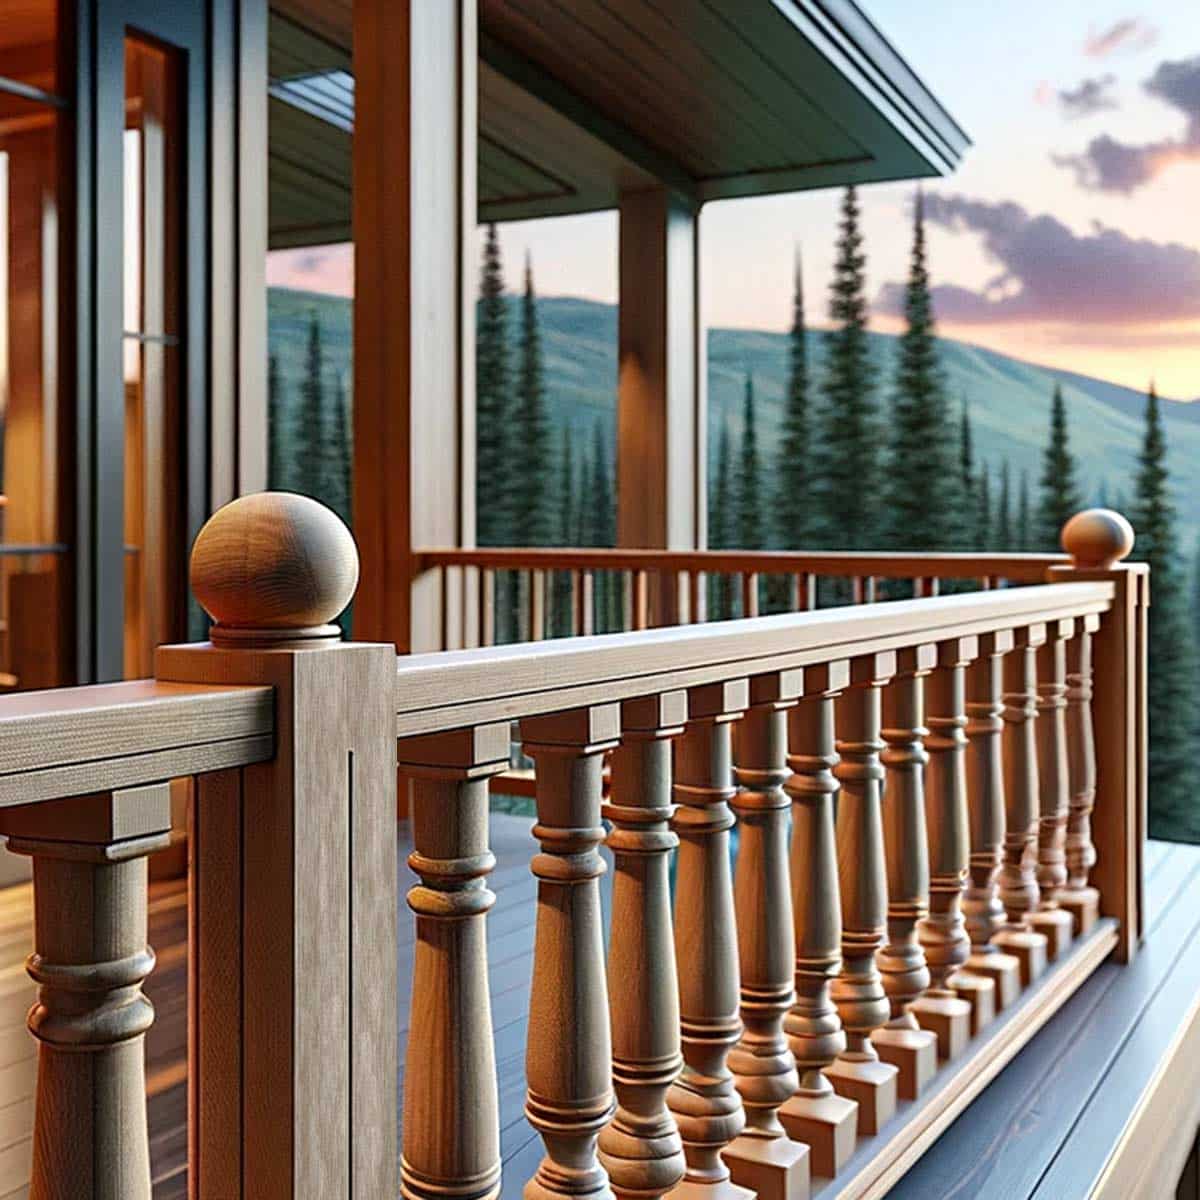 Custom deck parts are highlighted in this image of a mountain home at sunset.